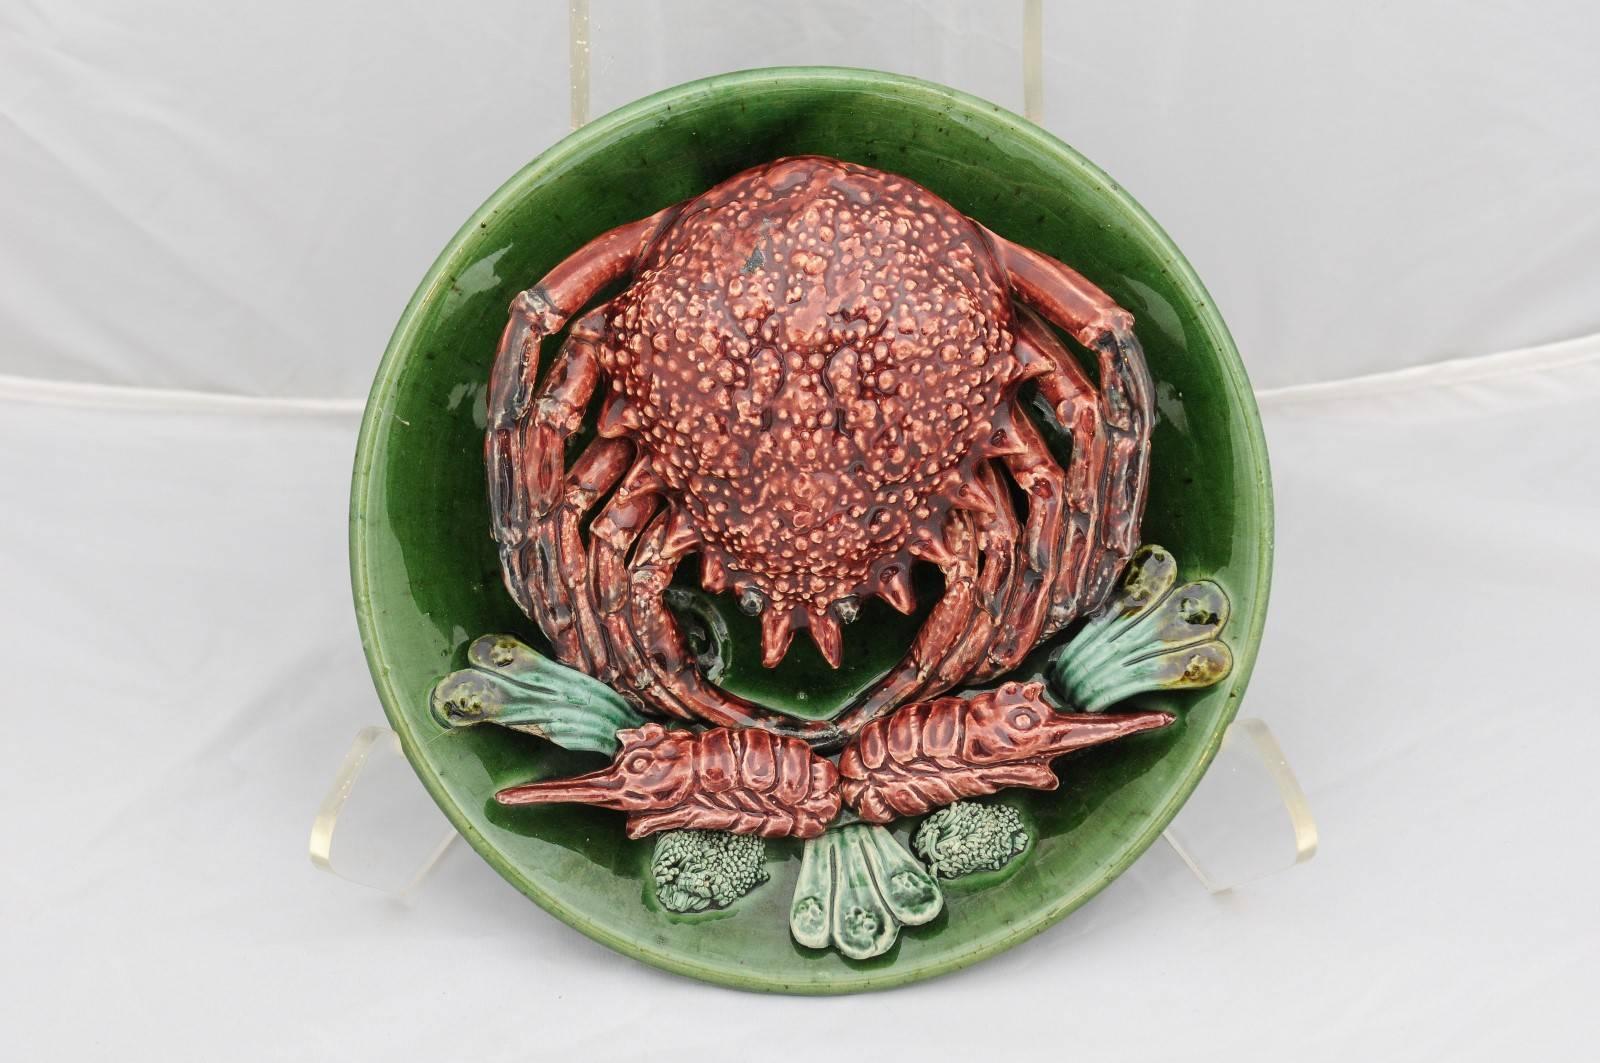 A majolica plate with Palissy style sea spider from the mid 20th century. This Portuguese majolica was made in the manner of Bernard Palissy, a French Renaissance craftsman who worked at the Court of King Henri II and Queen Catherine de Médicis in